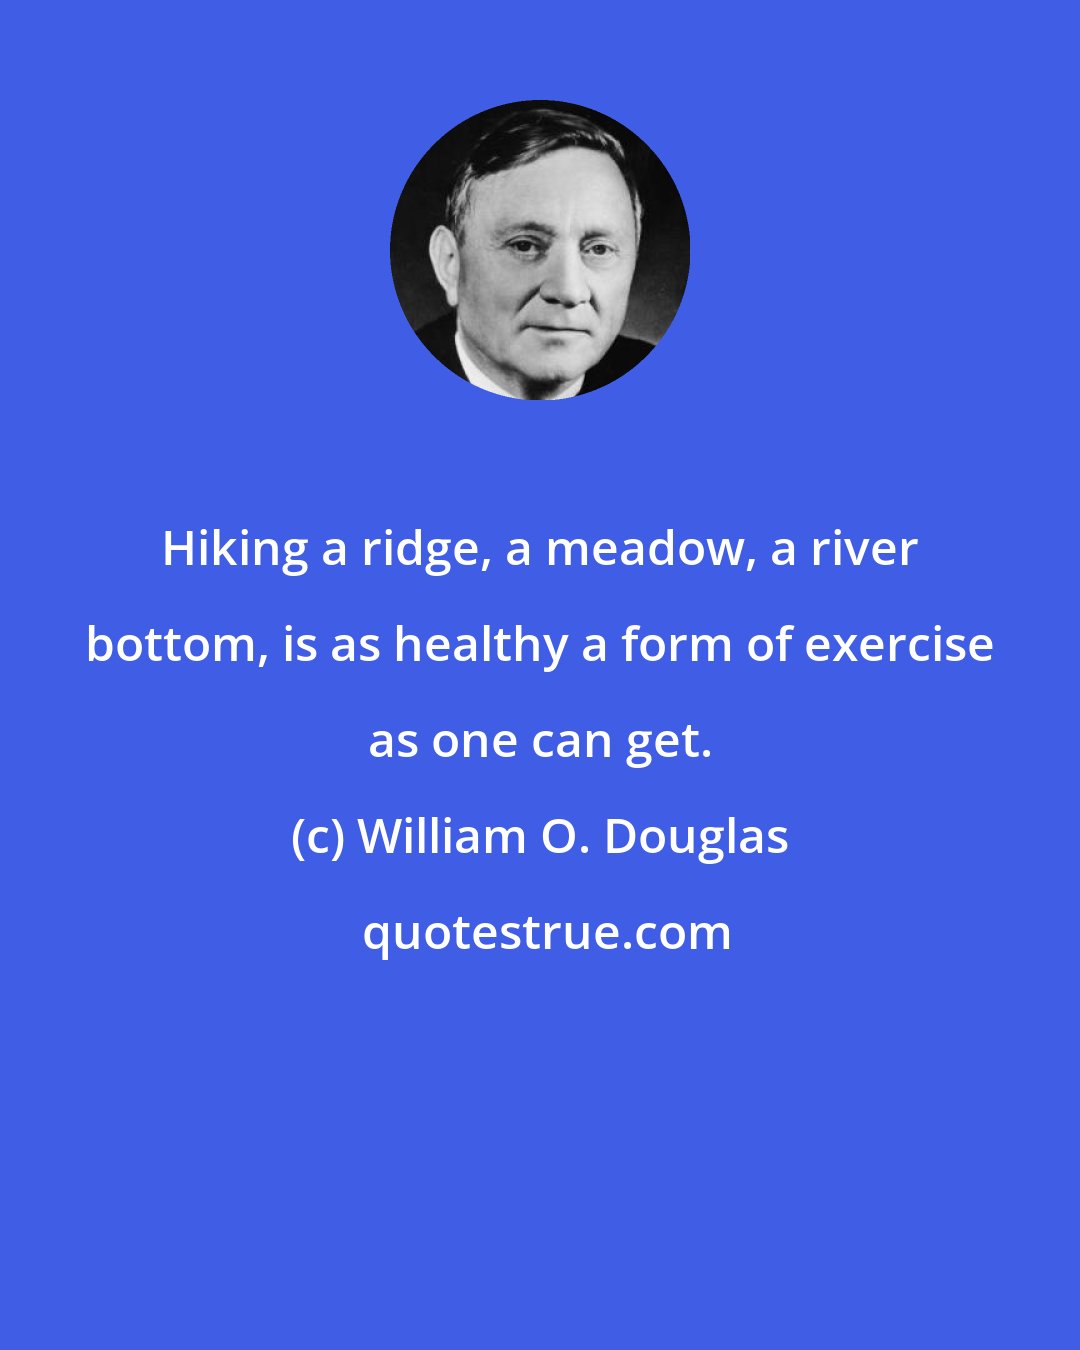 William O. Douglas: Hiking a ridge, a meadow, a river bottom, is as healthy a form of exercise as one can get.